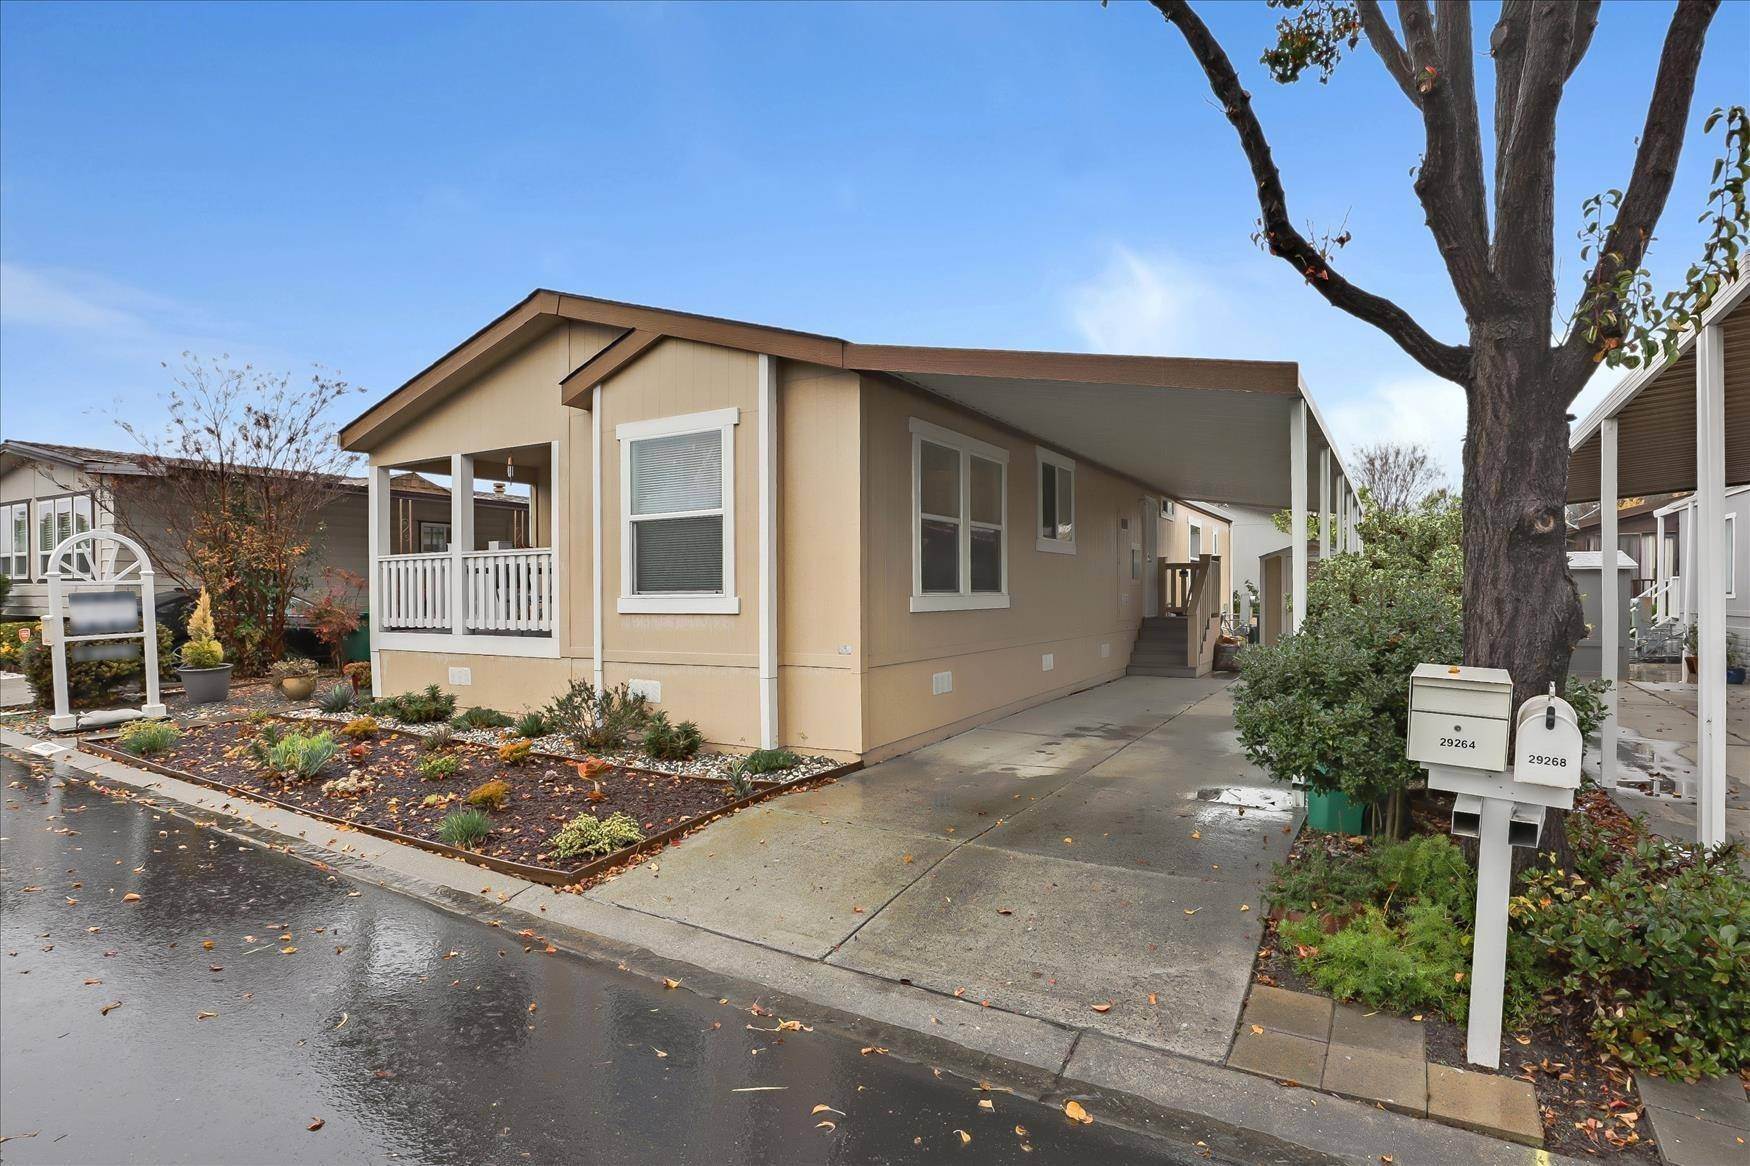 5. Mobile Home for Sale at Hayward, CA 94544